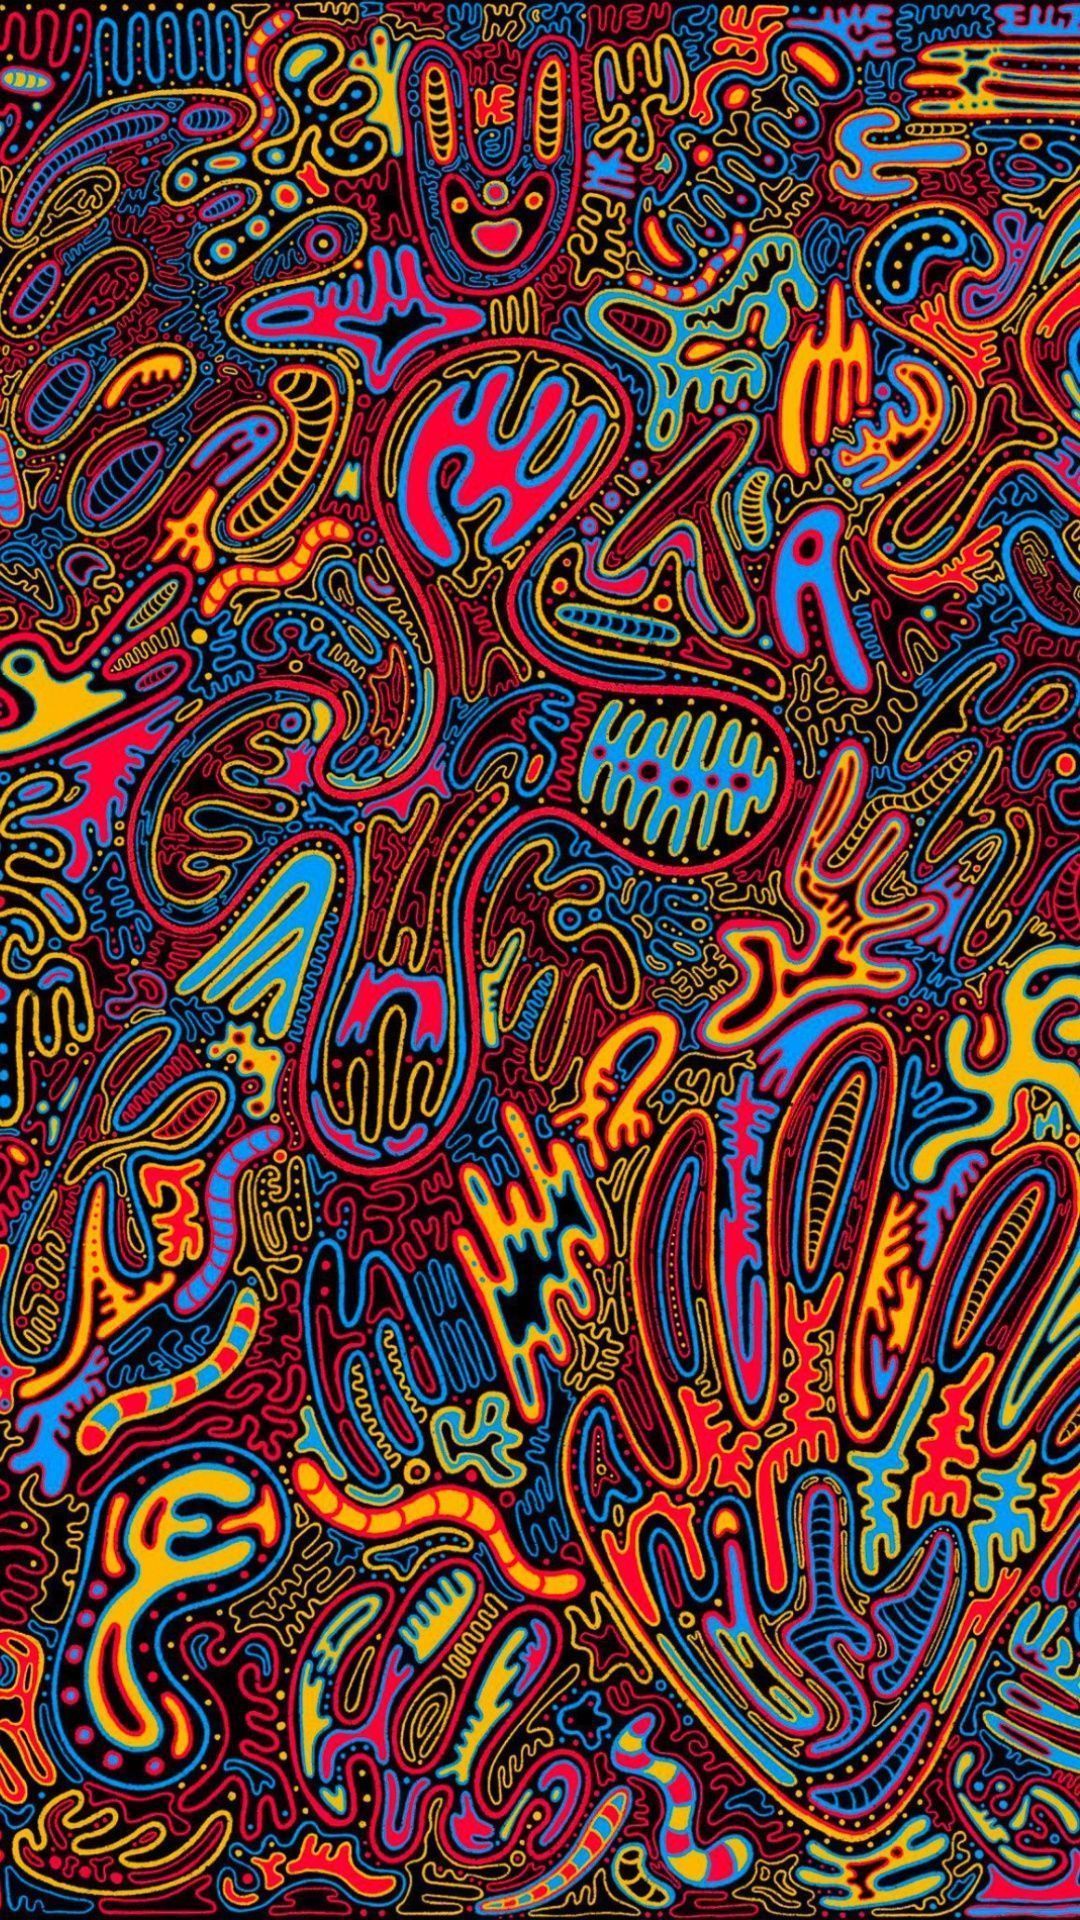 A pattern of bright, colorful squiggles and shapes on a black background. - Psychedelic